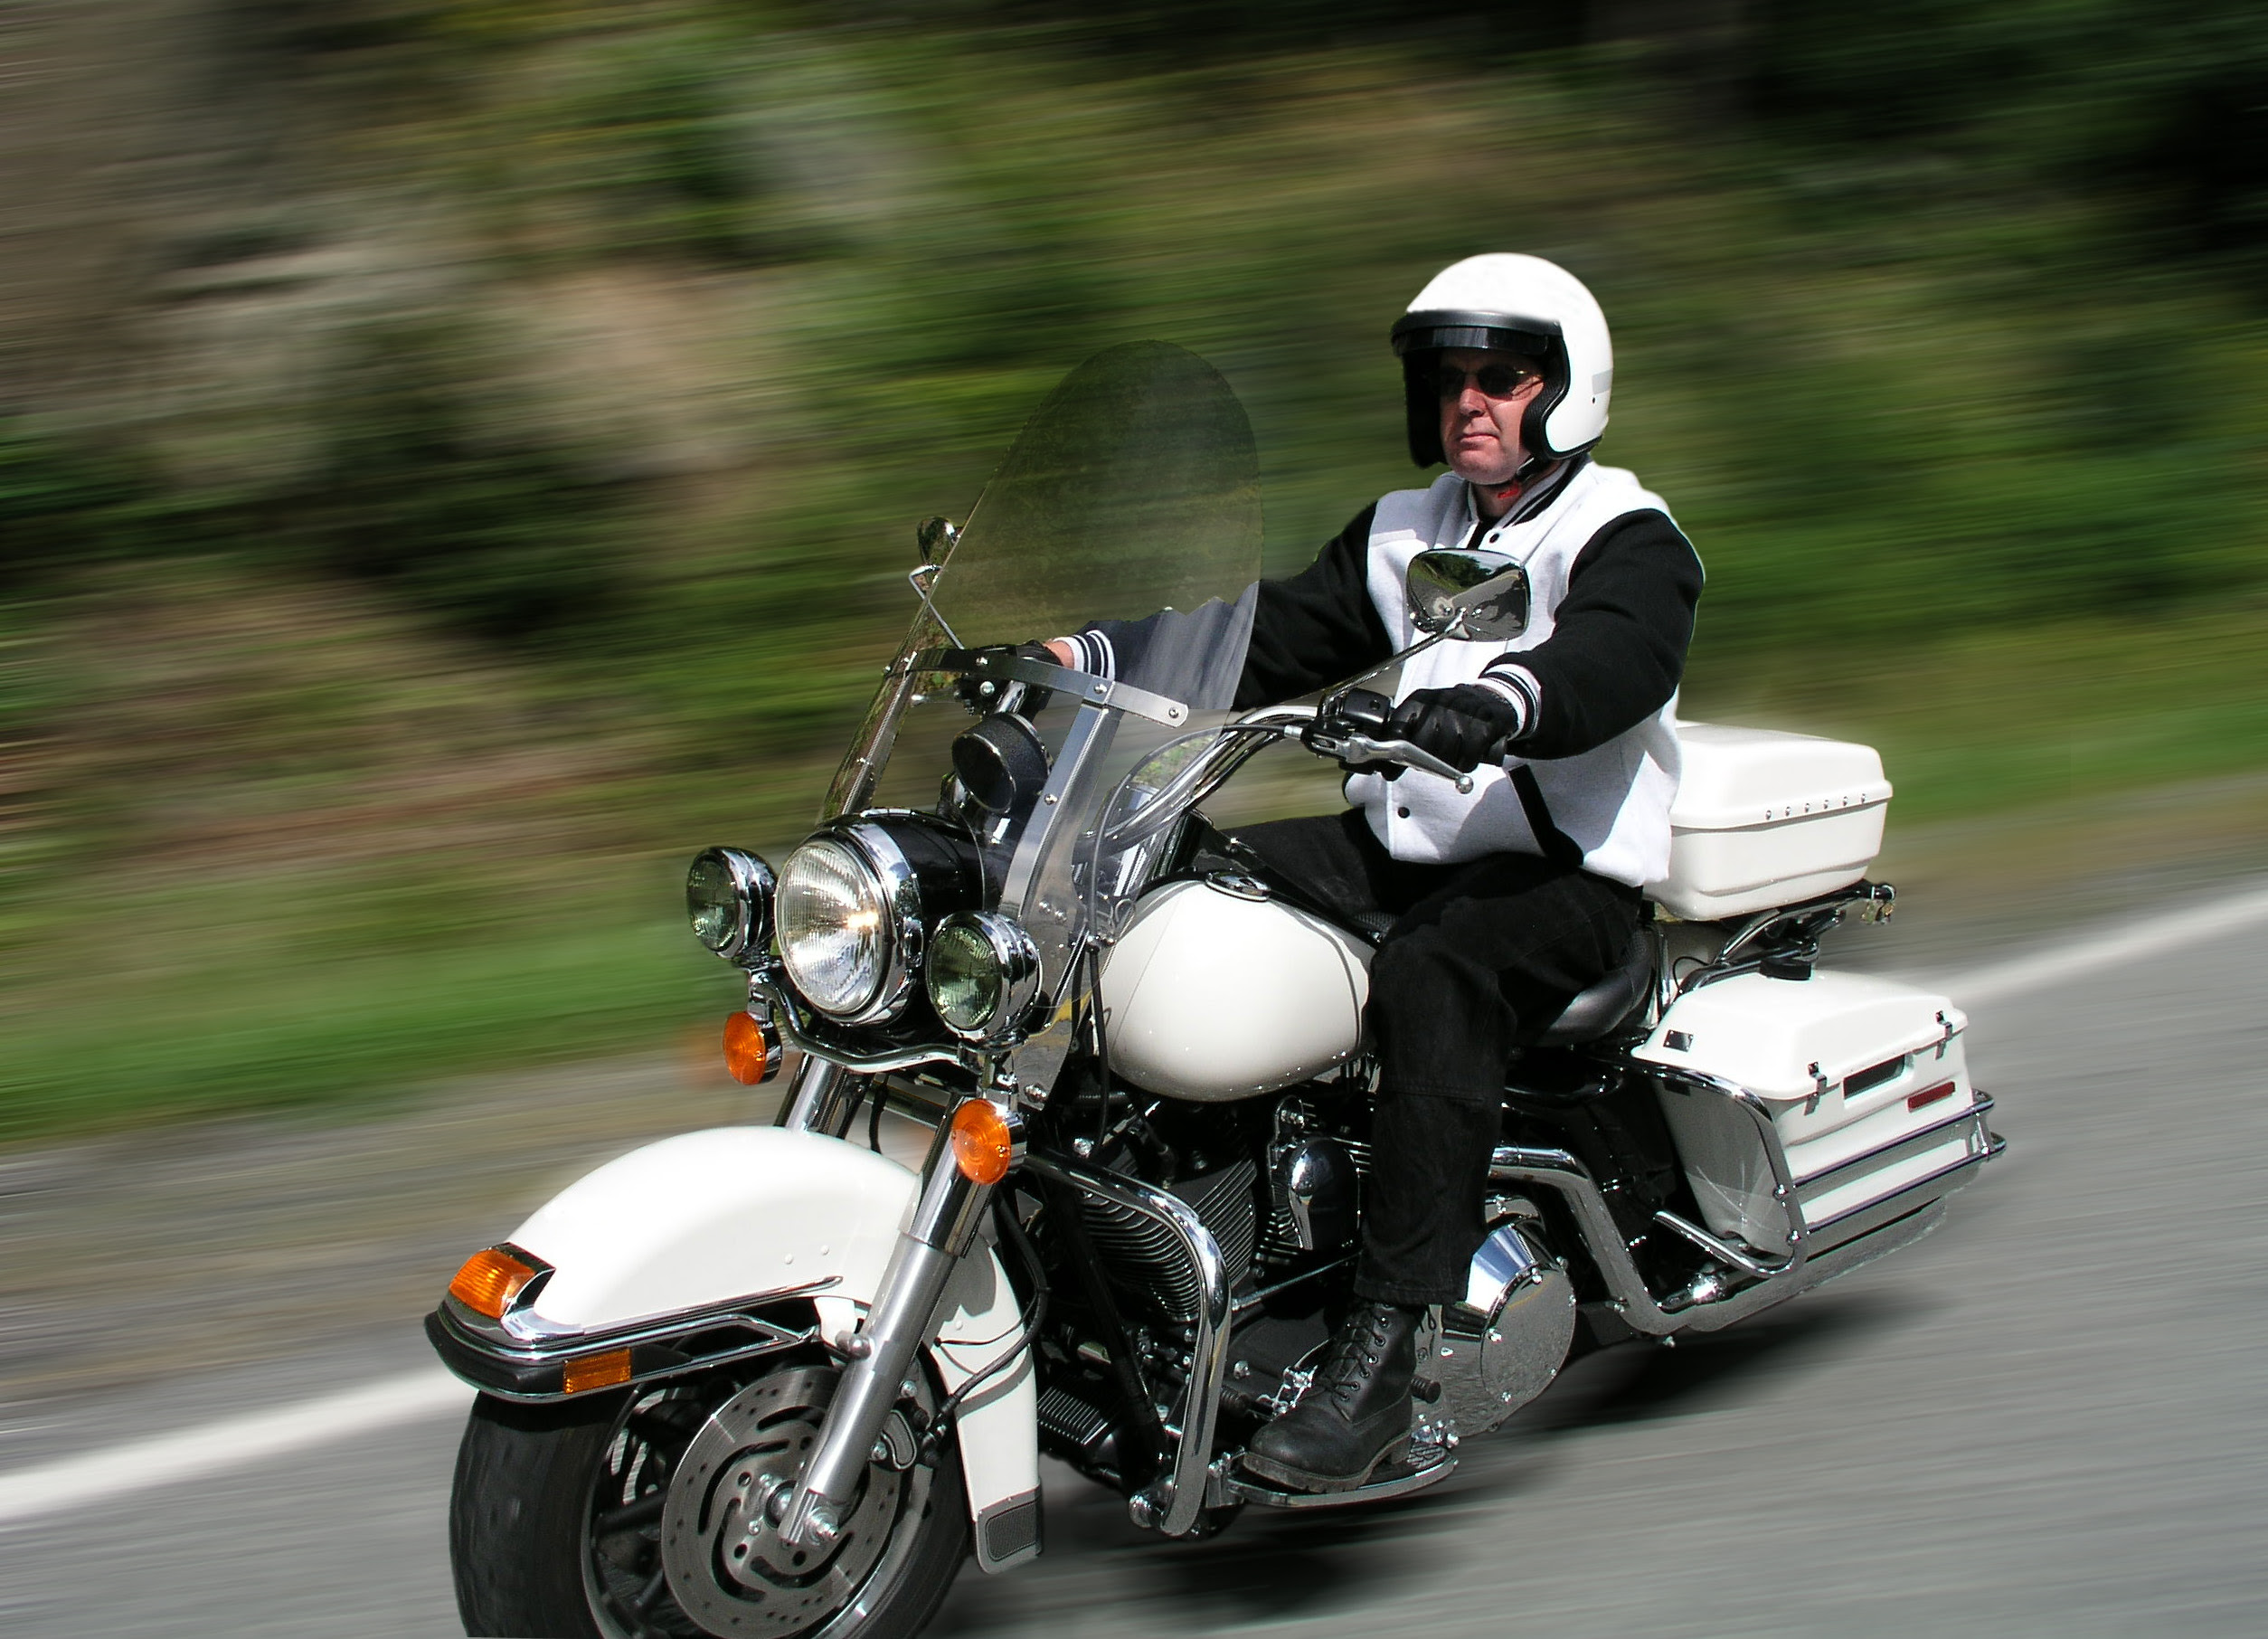 Motorcycle Insurance Online Get Tips On Safe Riding Get Motorcycle